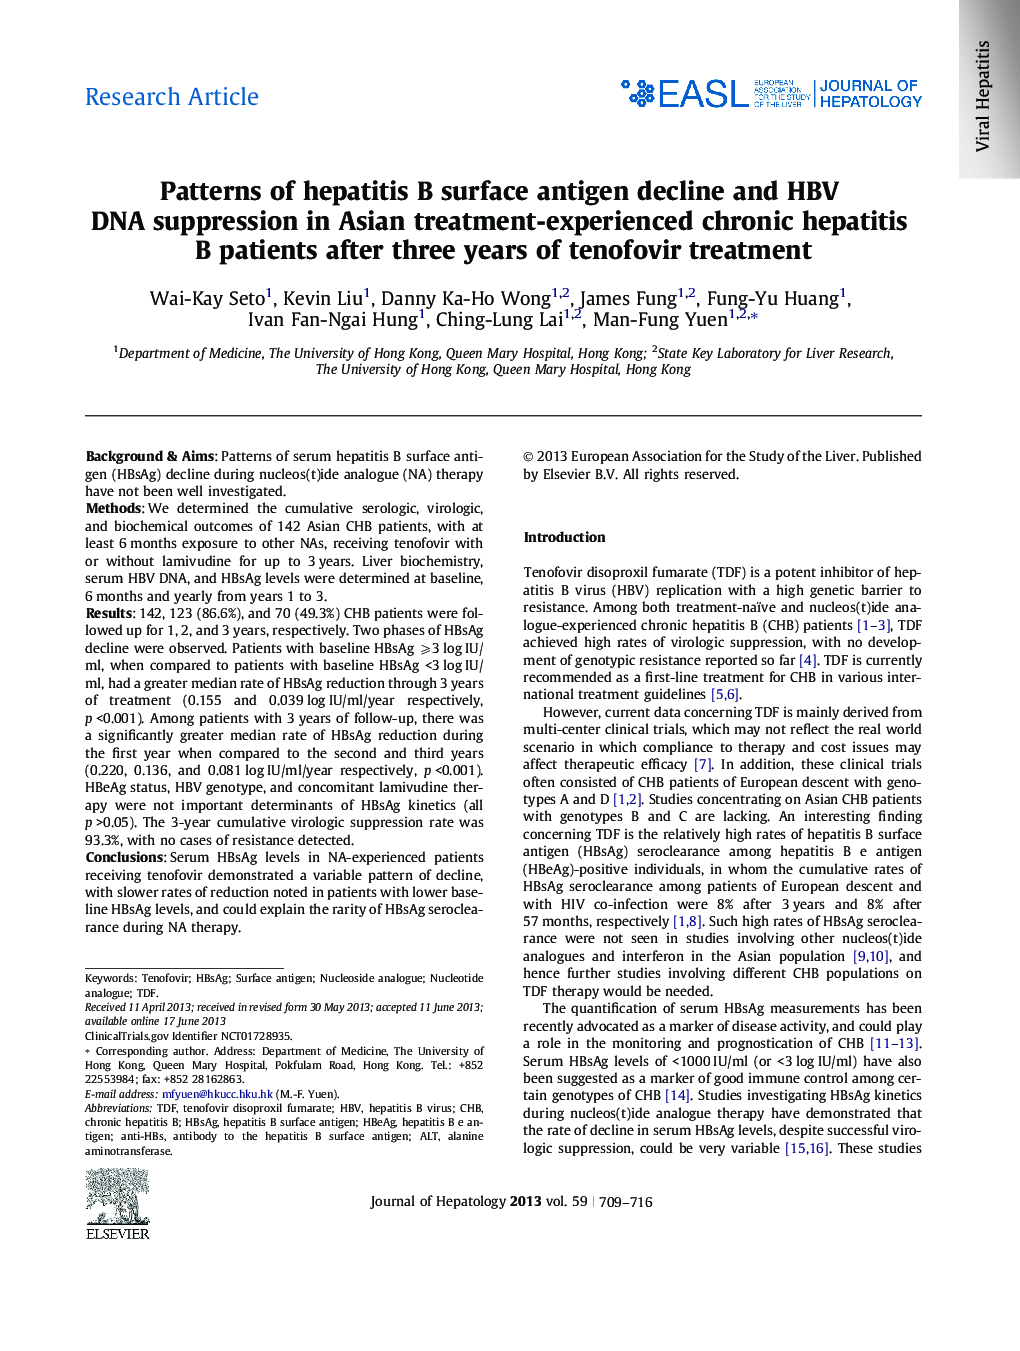 Research ArticlePatterns of hepatitis B surface antigen decline and HBV DNA suppression in Asian treatment-experienced chronic hepatitis B patients after three years of tenofovir treatment